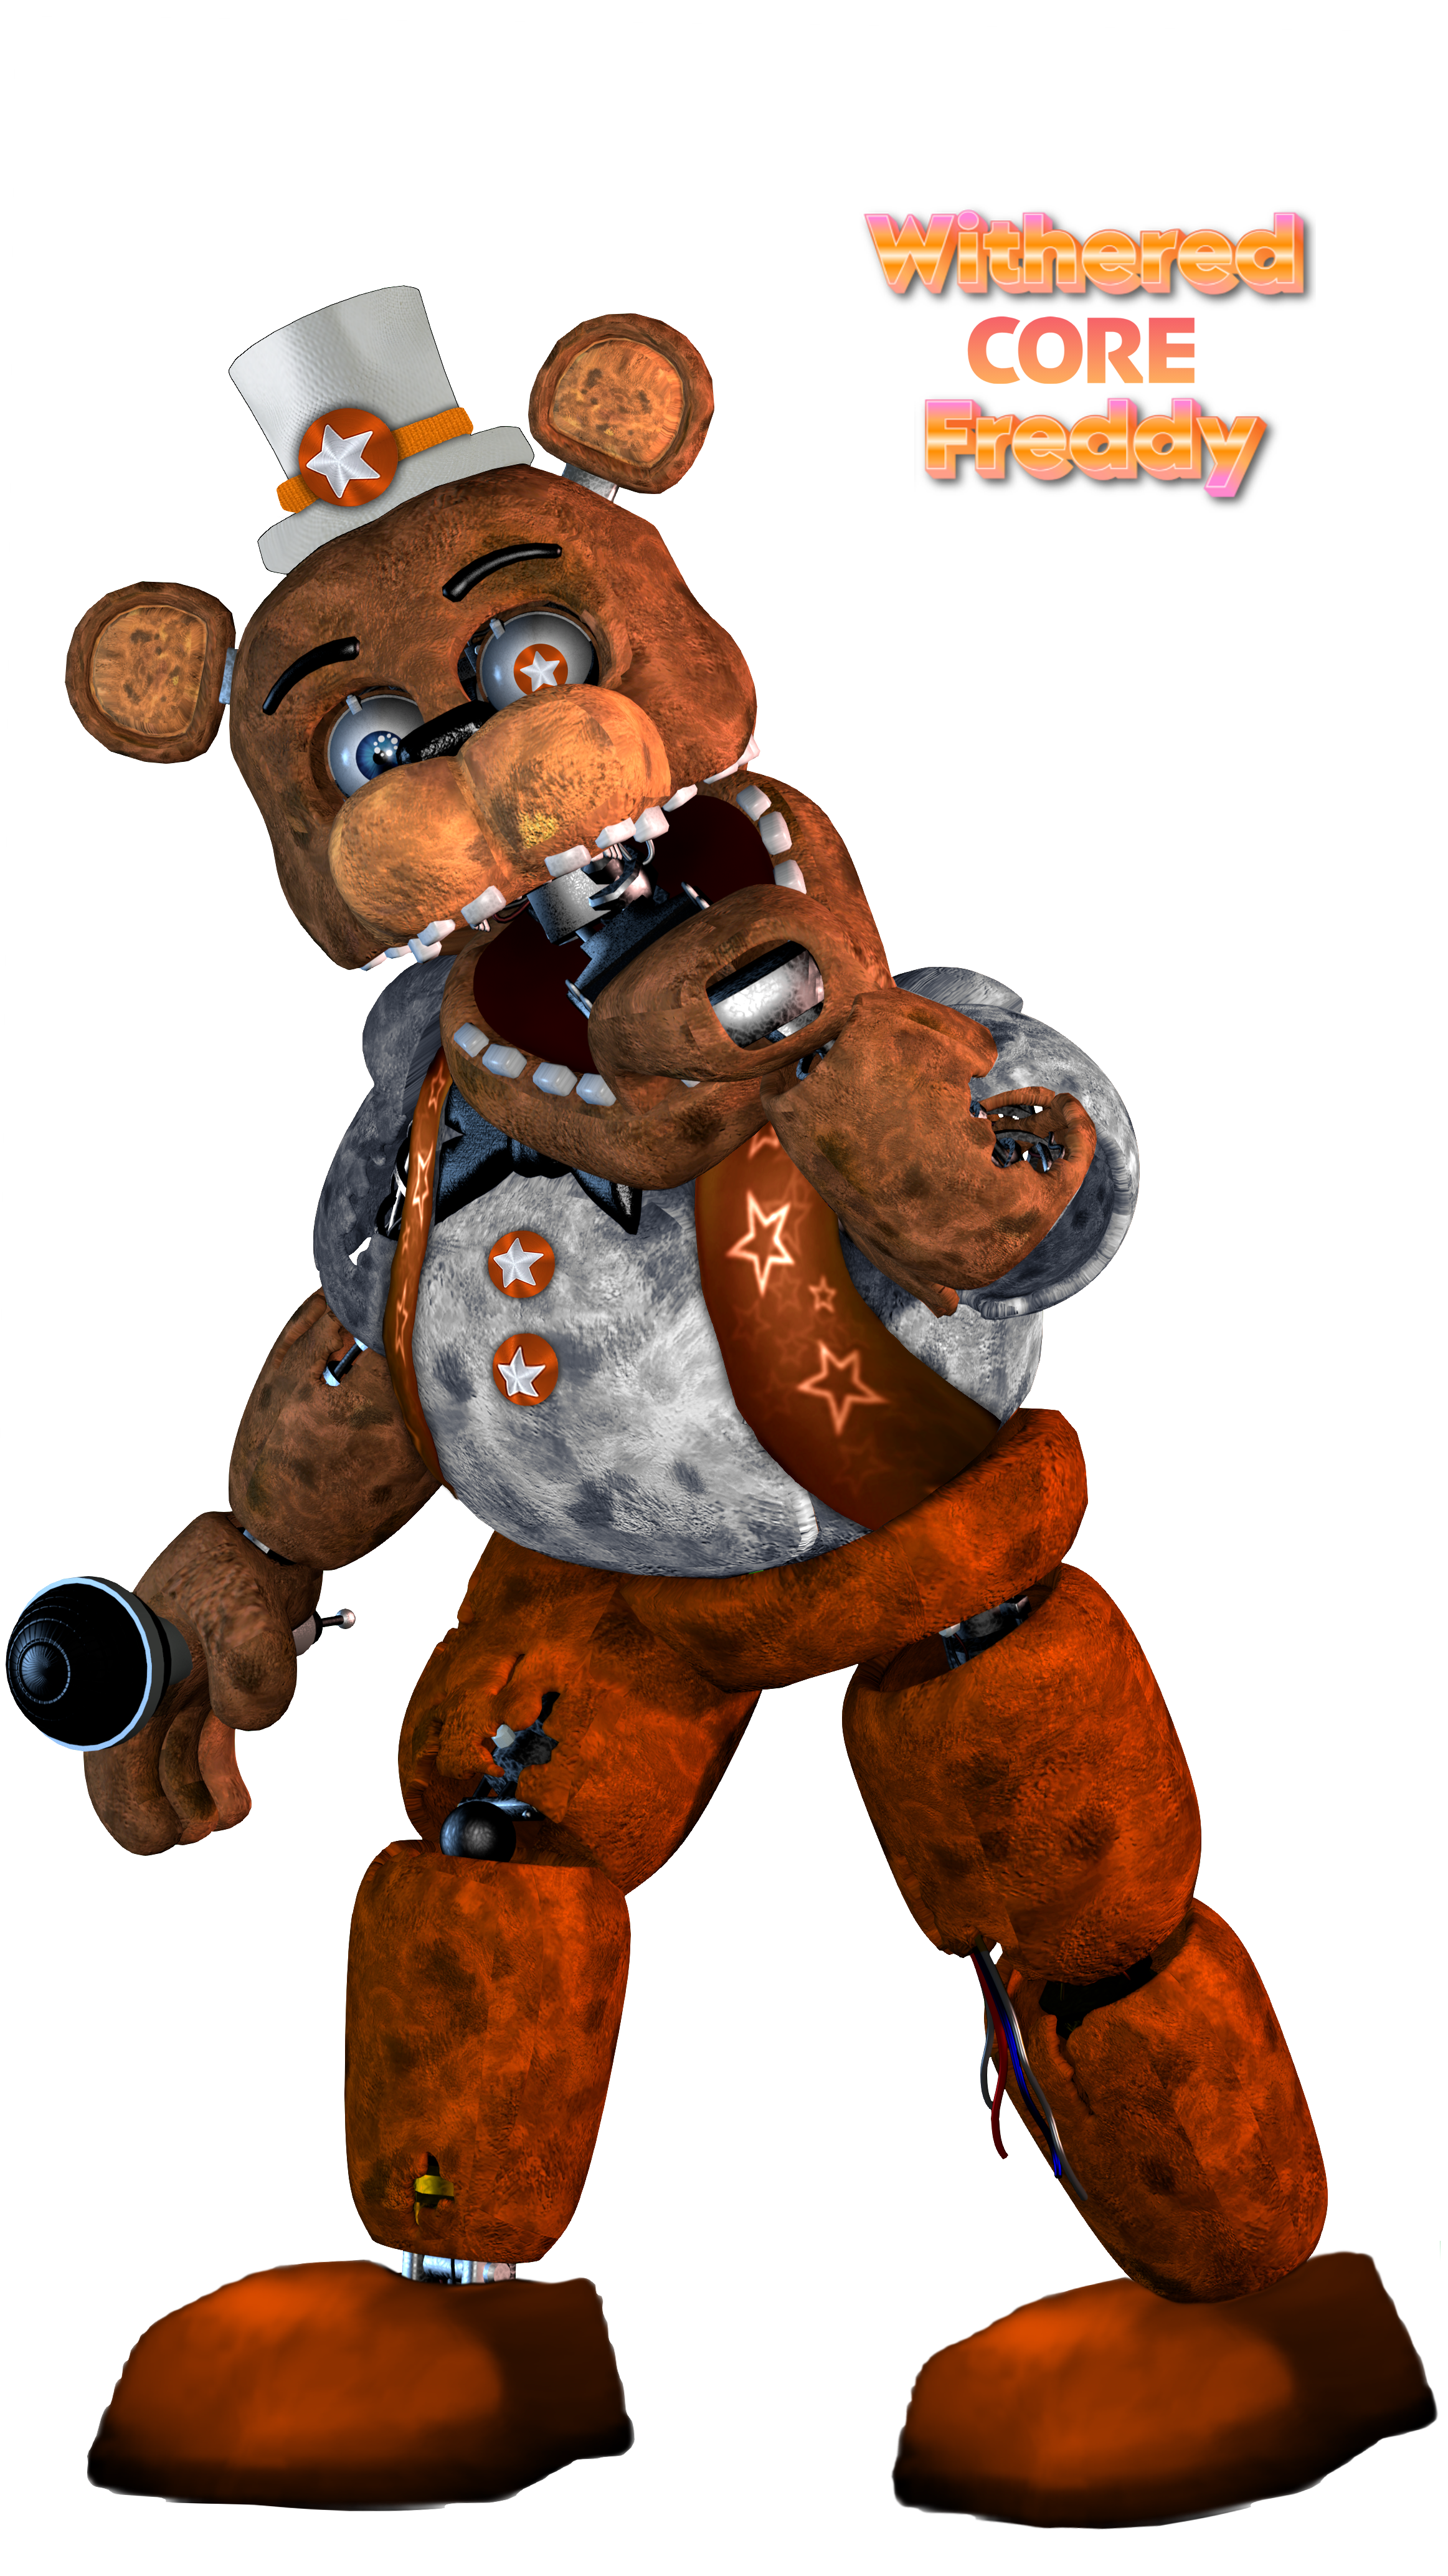 Download Editwithered Fredbear - Fnaf Withered Freddy Full Body